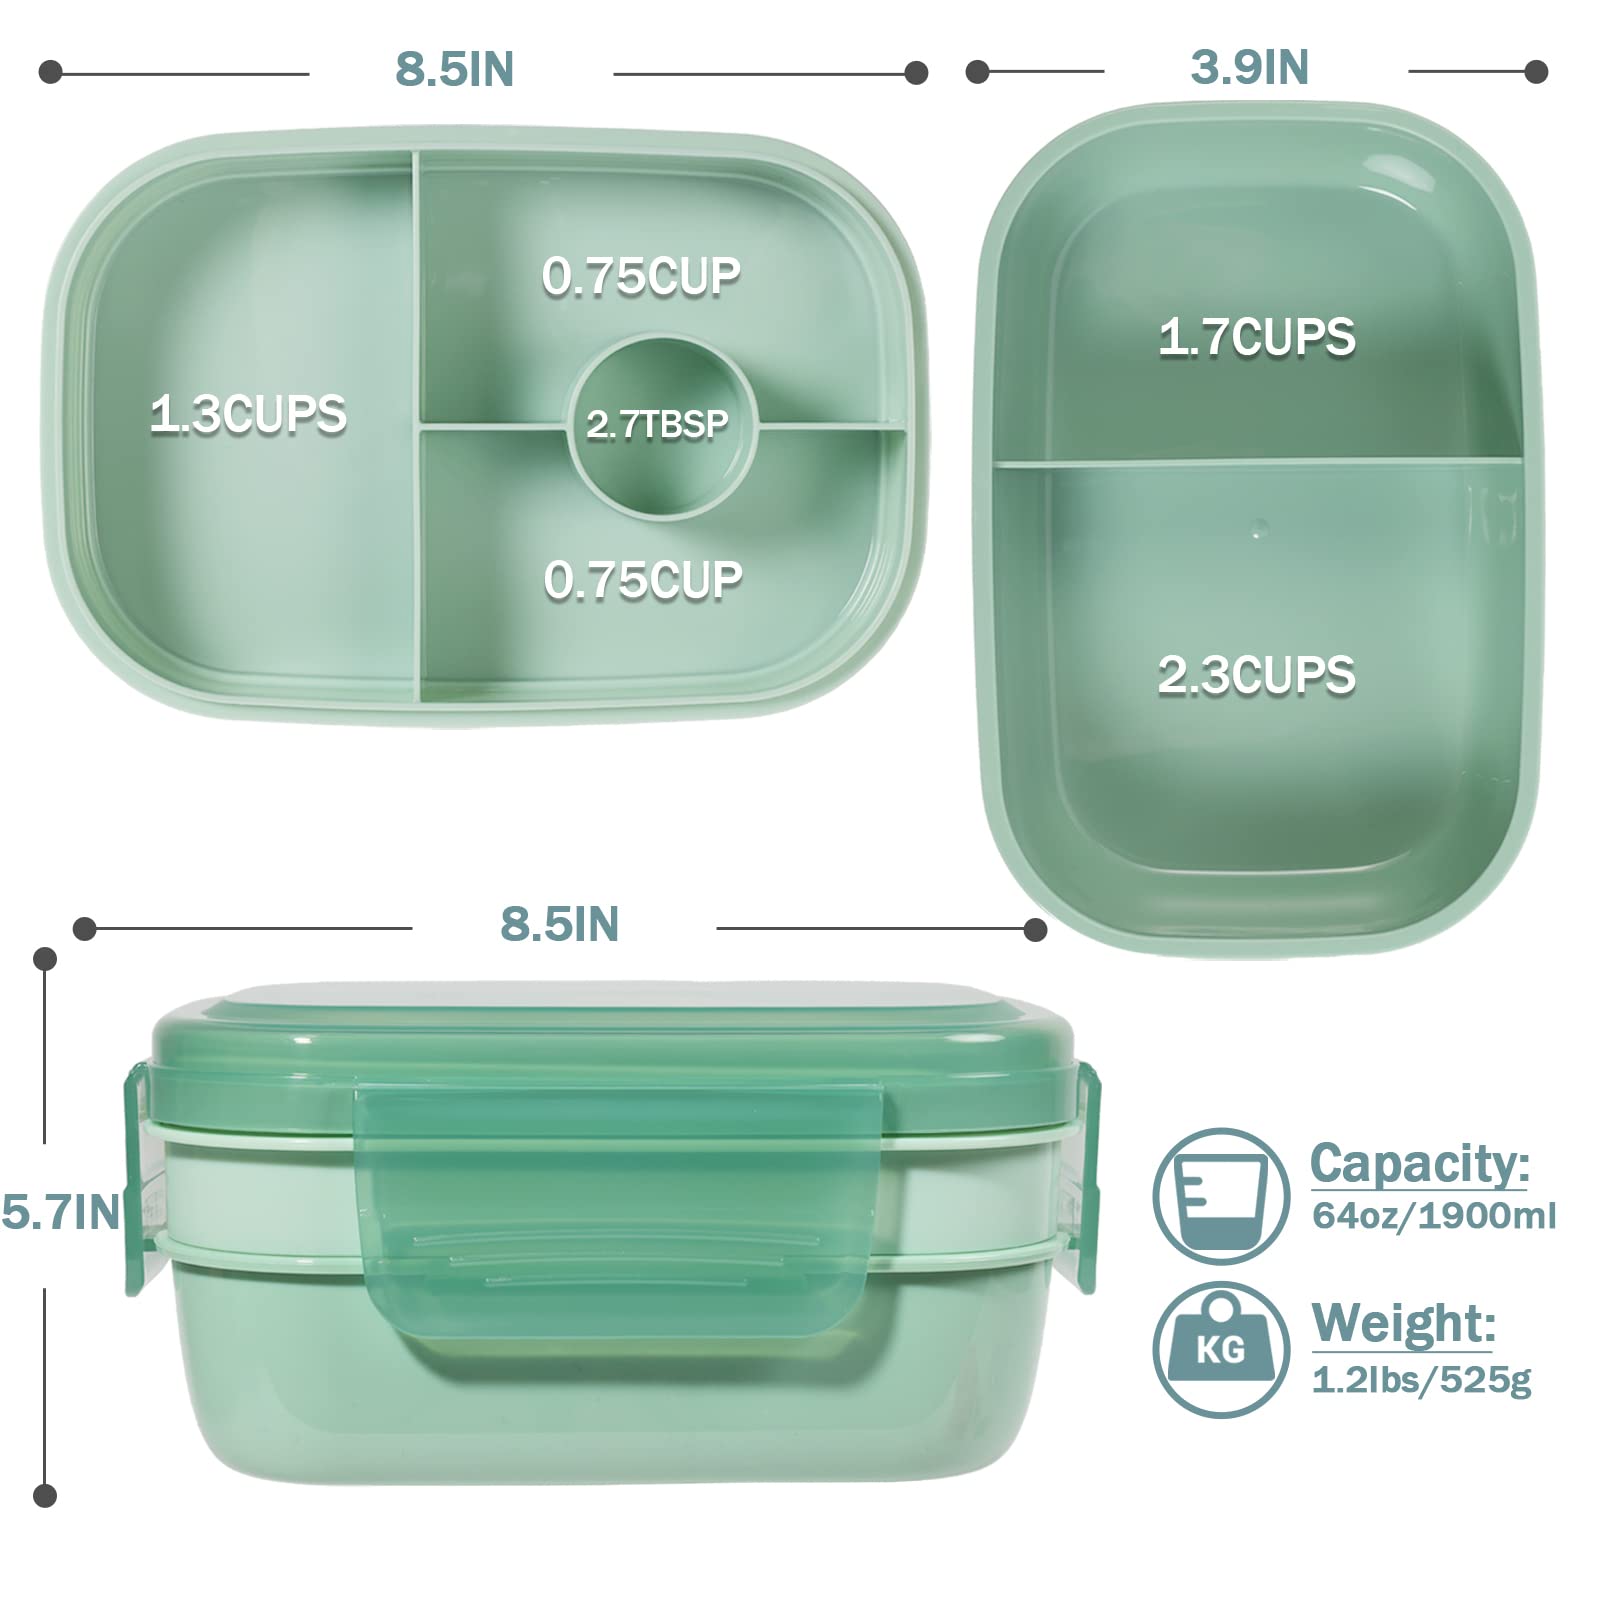 Puraville 3 Layers Stackable Bento Lunch Box for Kids and Adults, 1900ml Large capacity Lunch Box for Men and Women with Utensil Set, Leak Proof, BPA-Free, Microwave Dishwasher Safe - Light Green